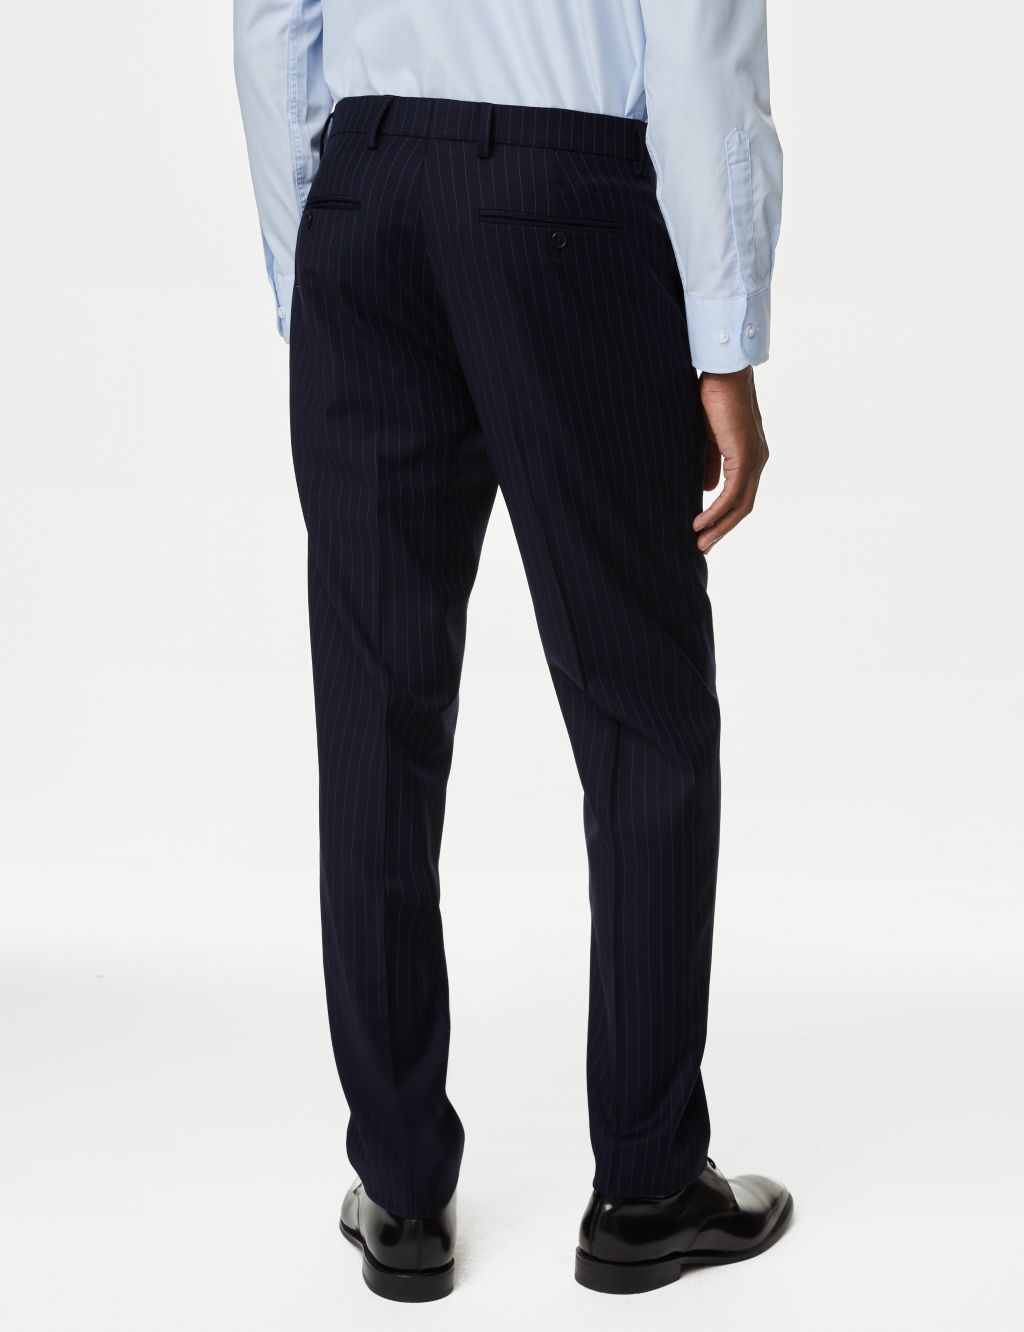 The Ultimate Tailored Fit Pinstripe Suit image 5